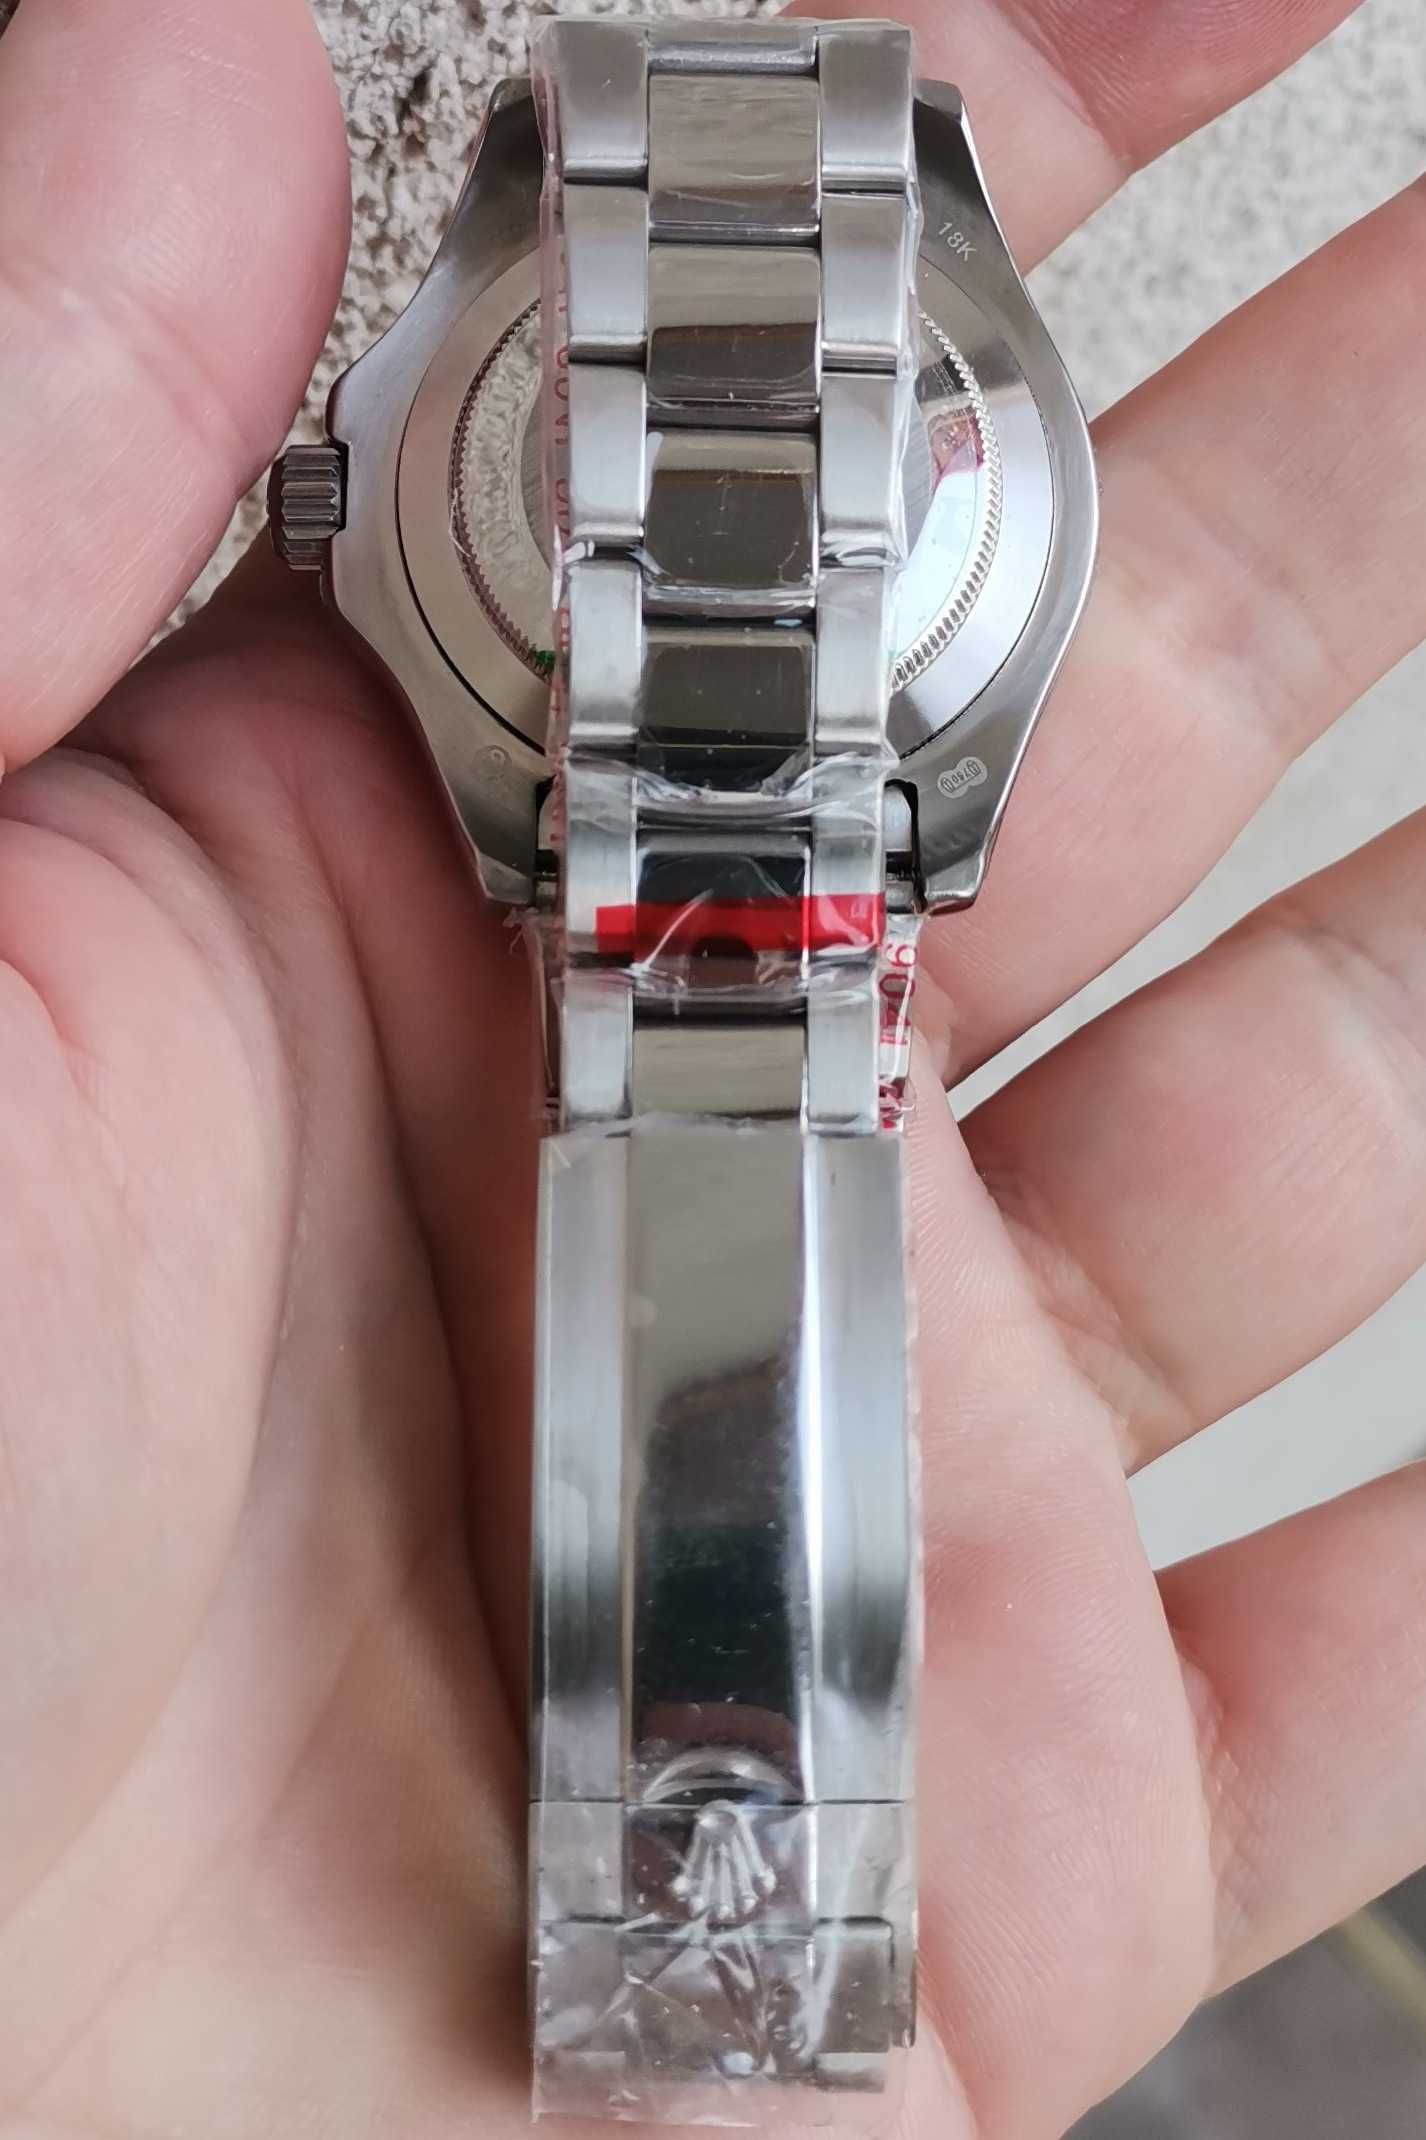 Rolex Yacht-Master Automatic